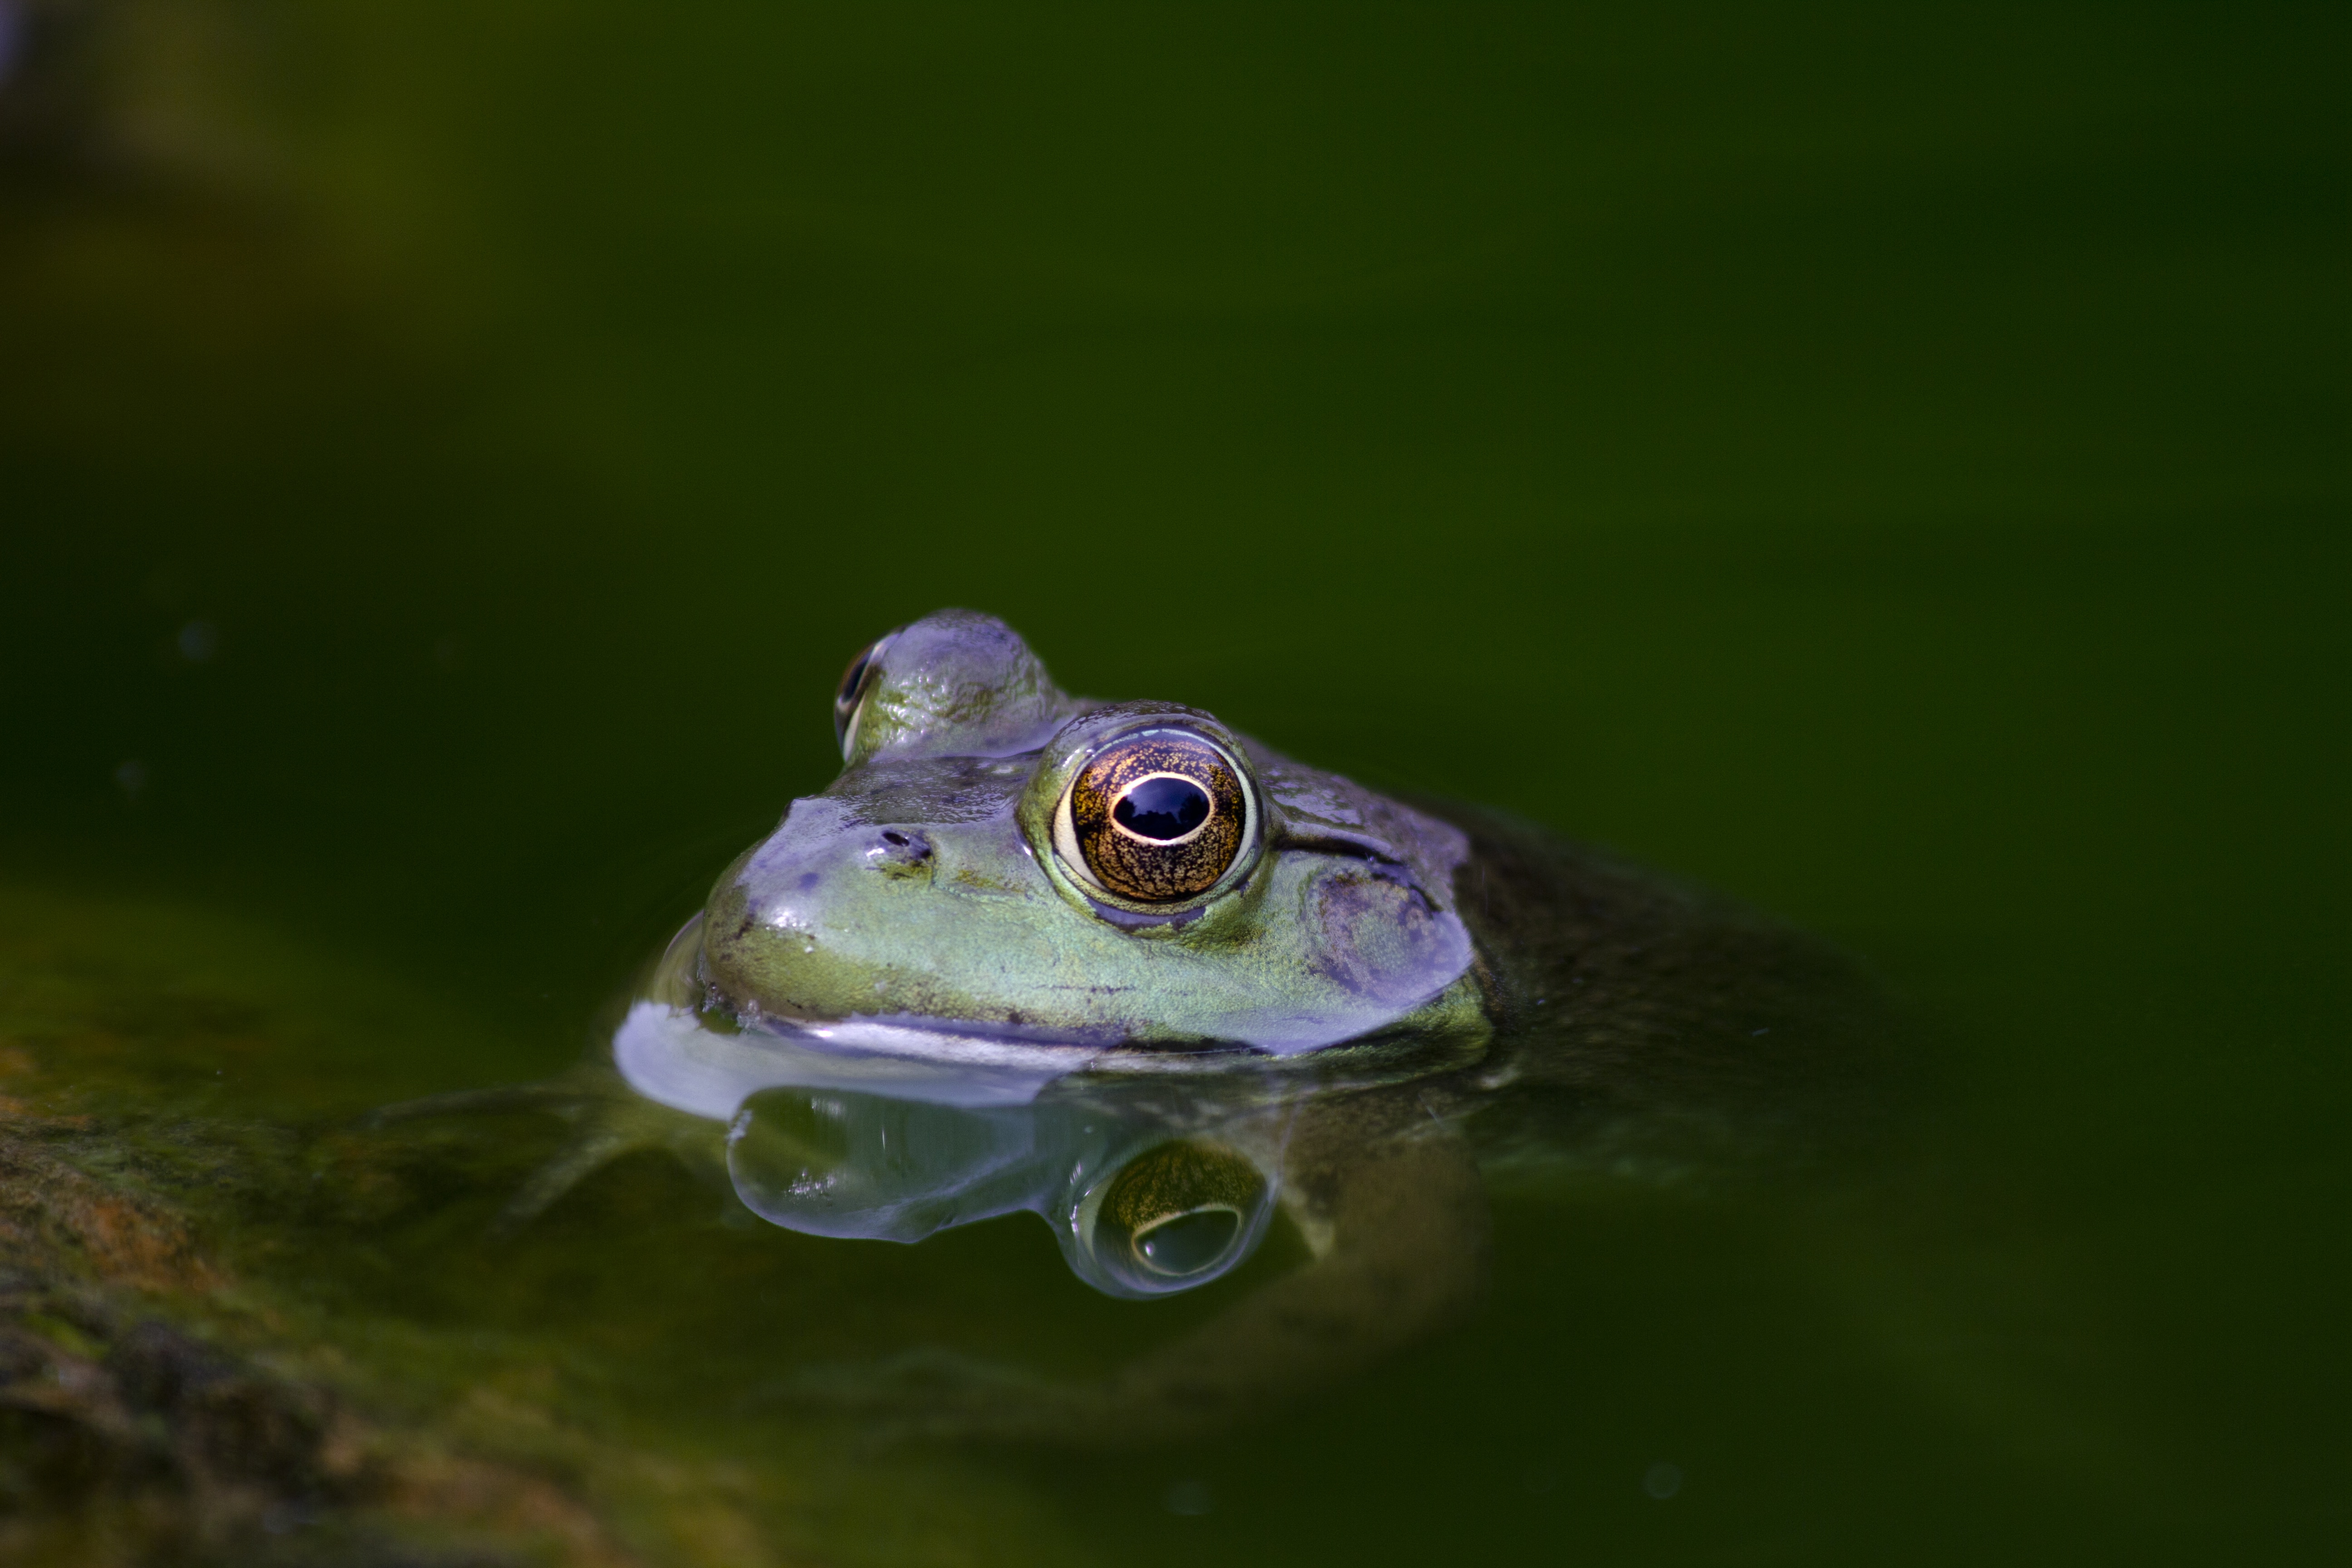 frog about to get out of body of water